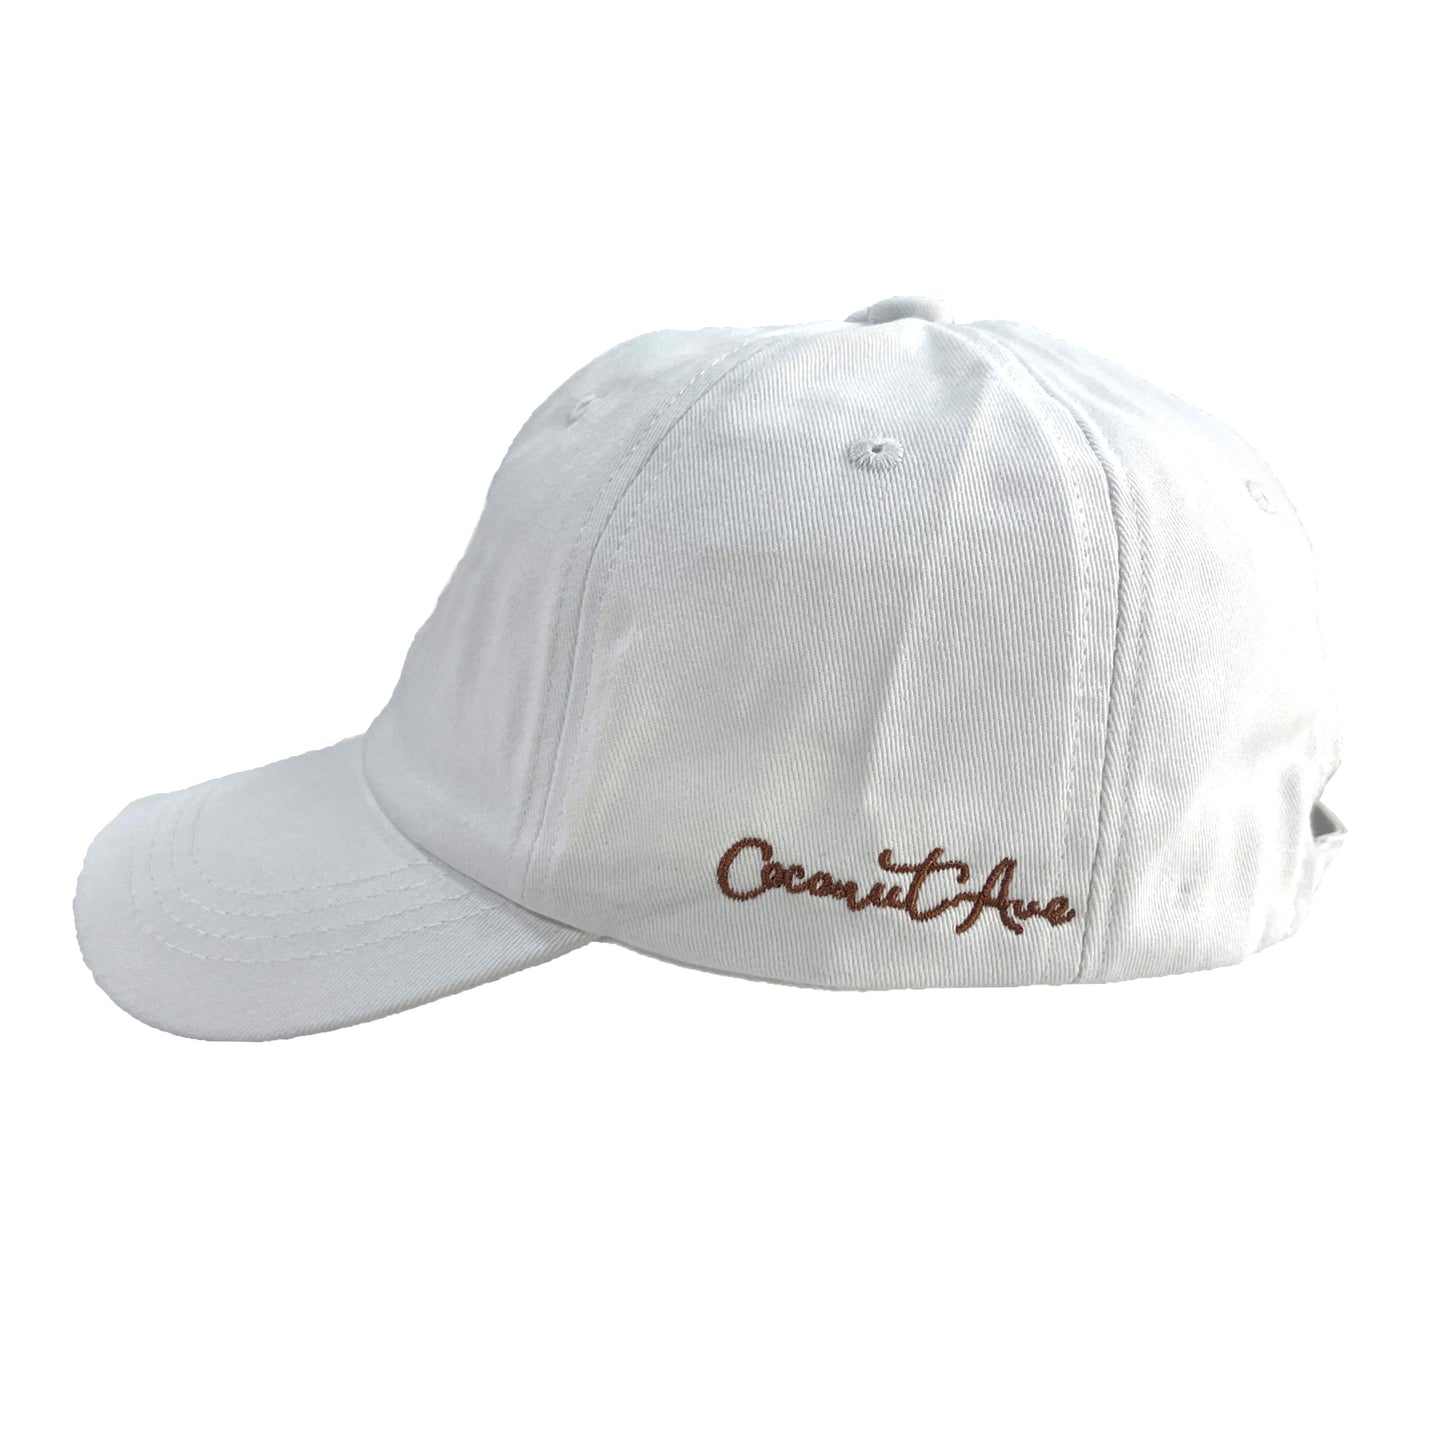 Coco Ave Dad Hat